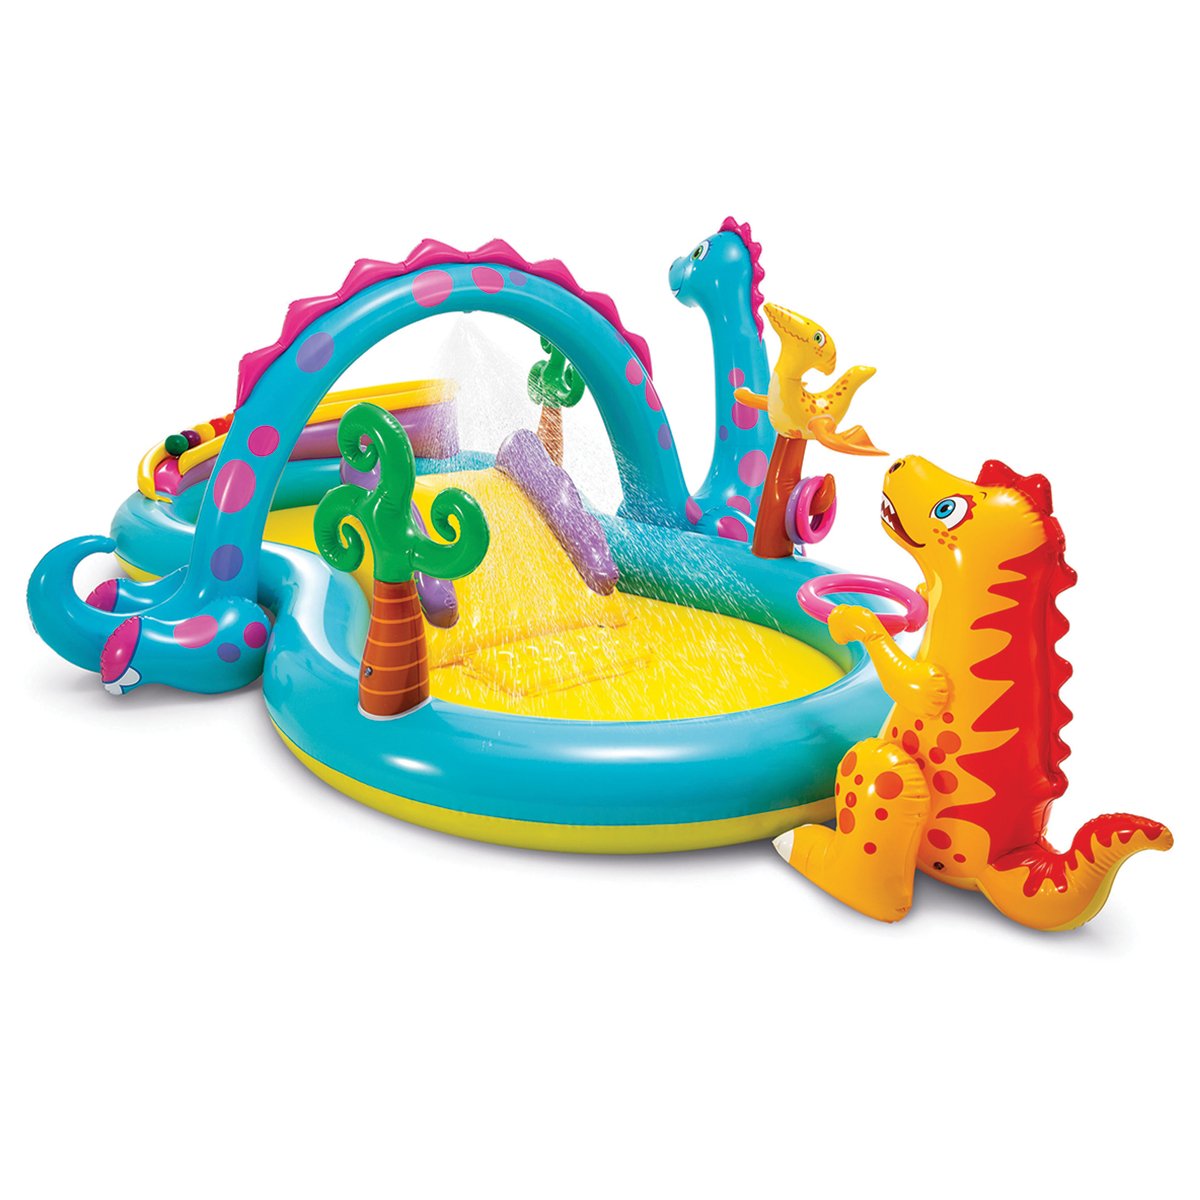 Intex 57135NP Dinoland Play Centre Inflatable Kids Pool with Slide 2